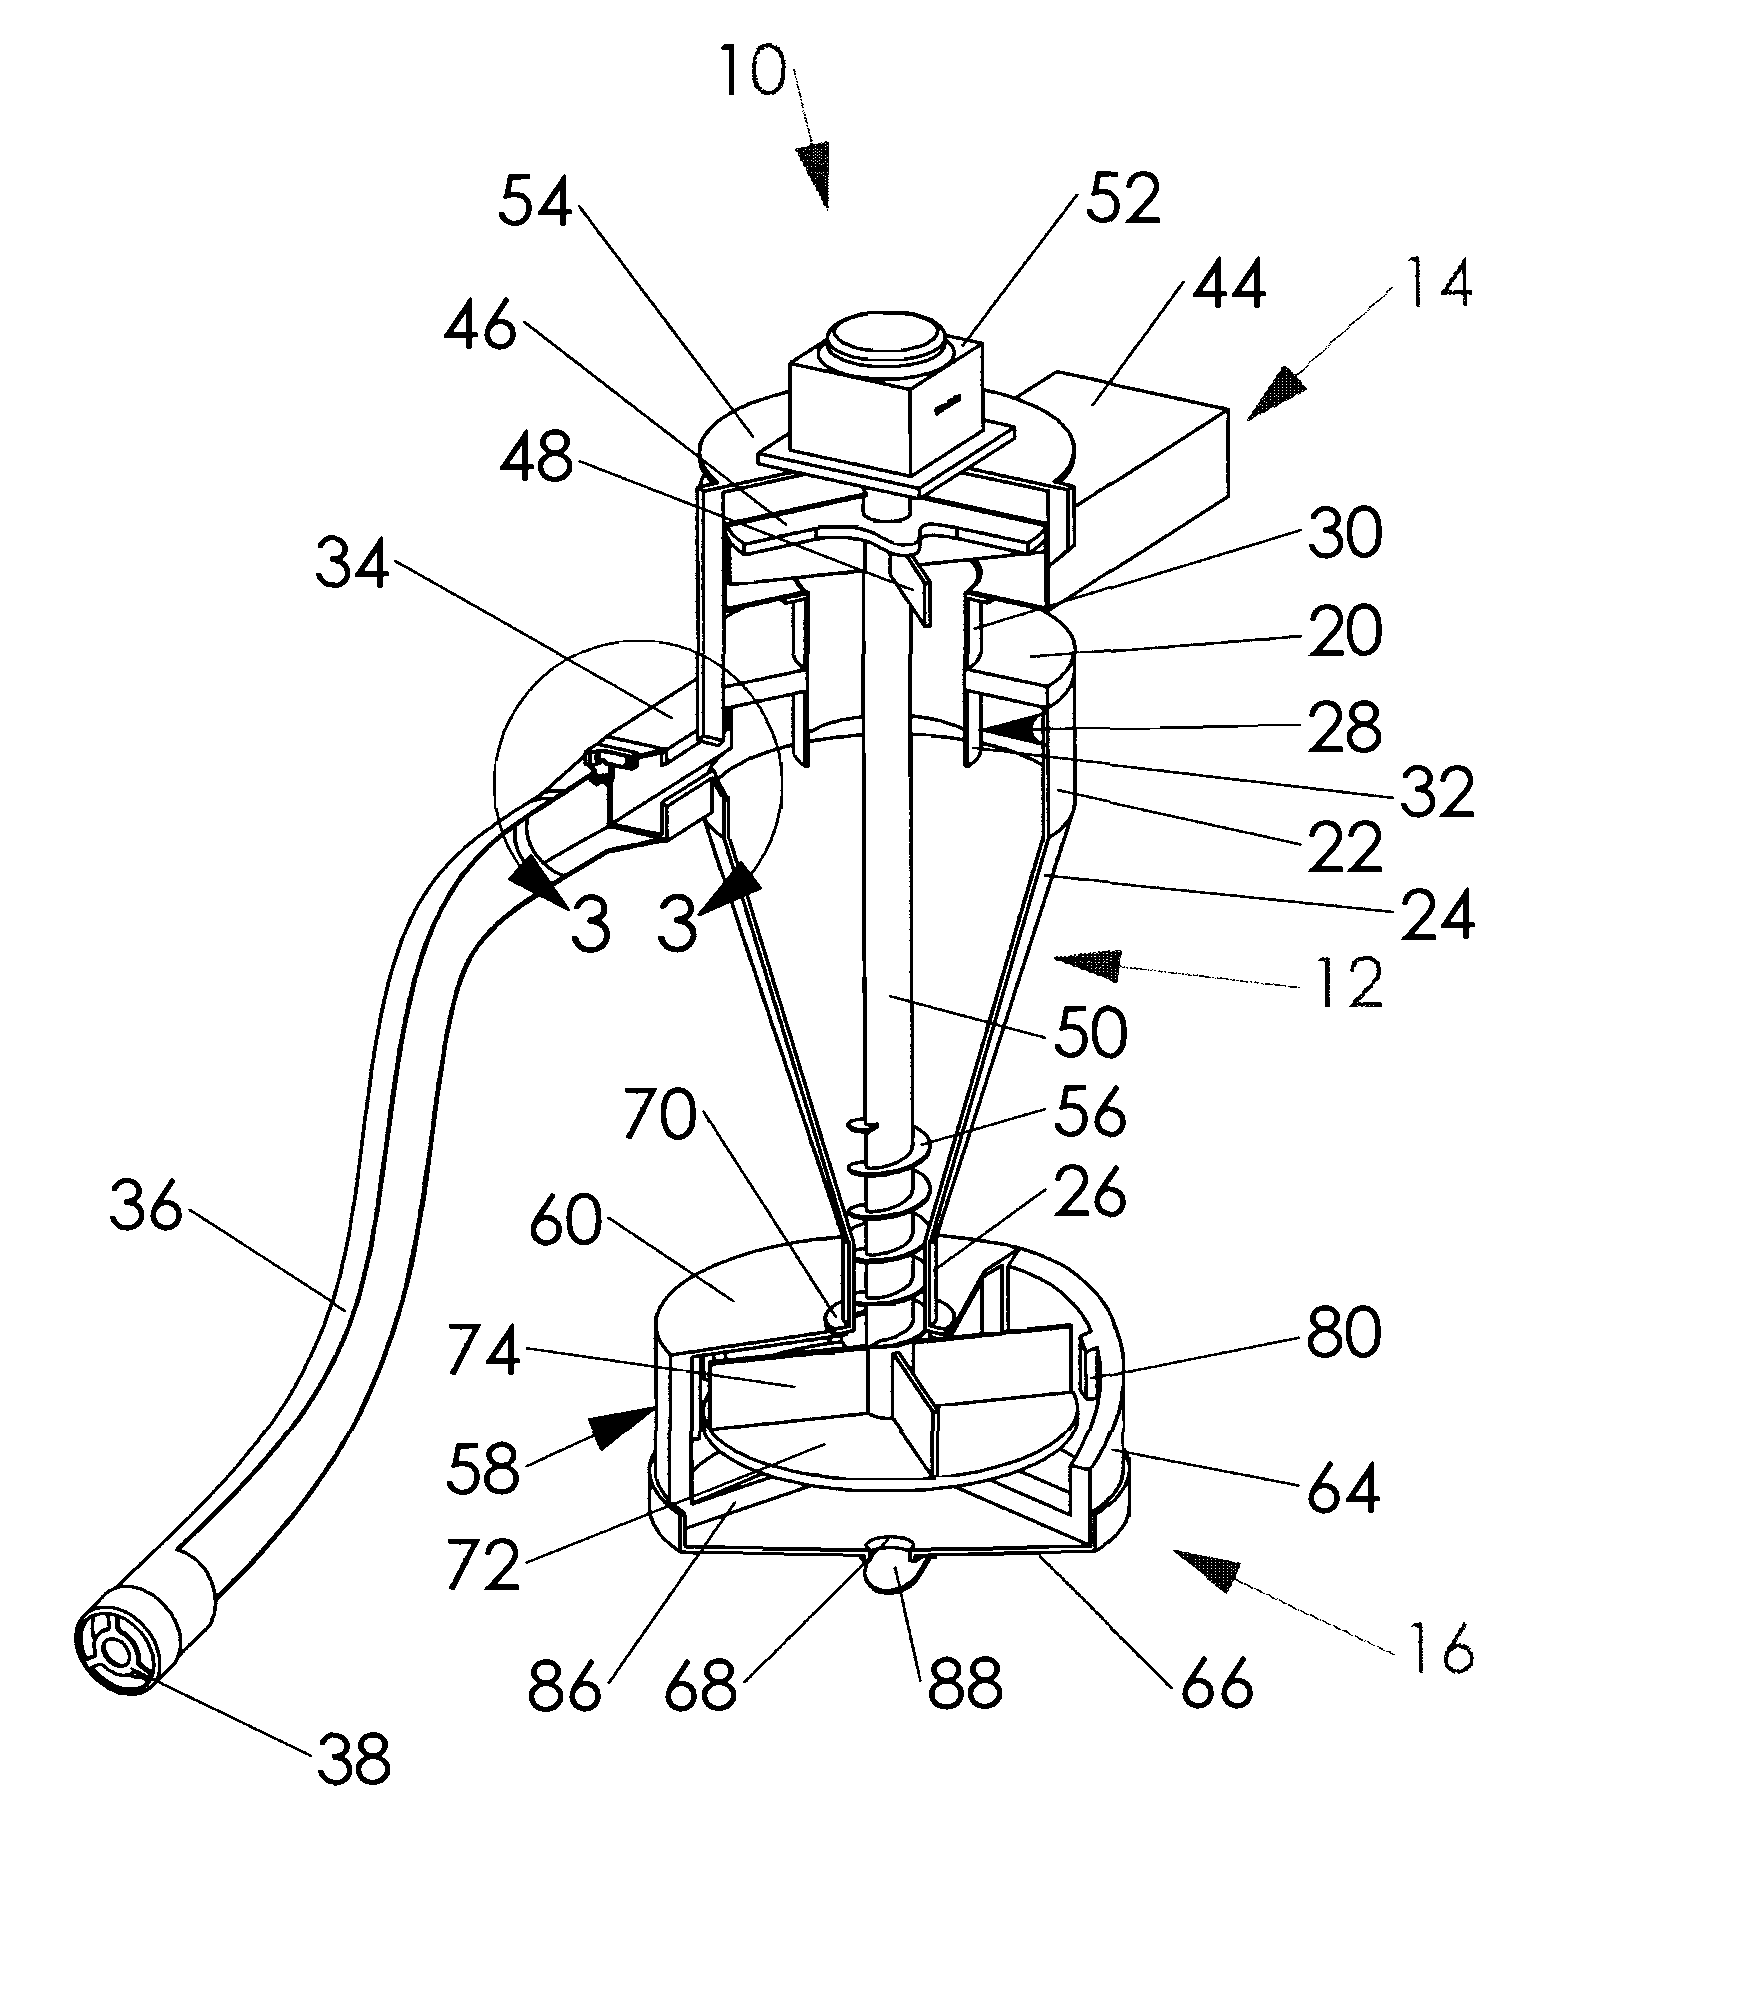 Apparatus and method for collecting and crushing seashells on a beach